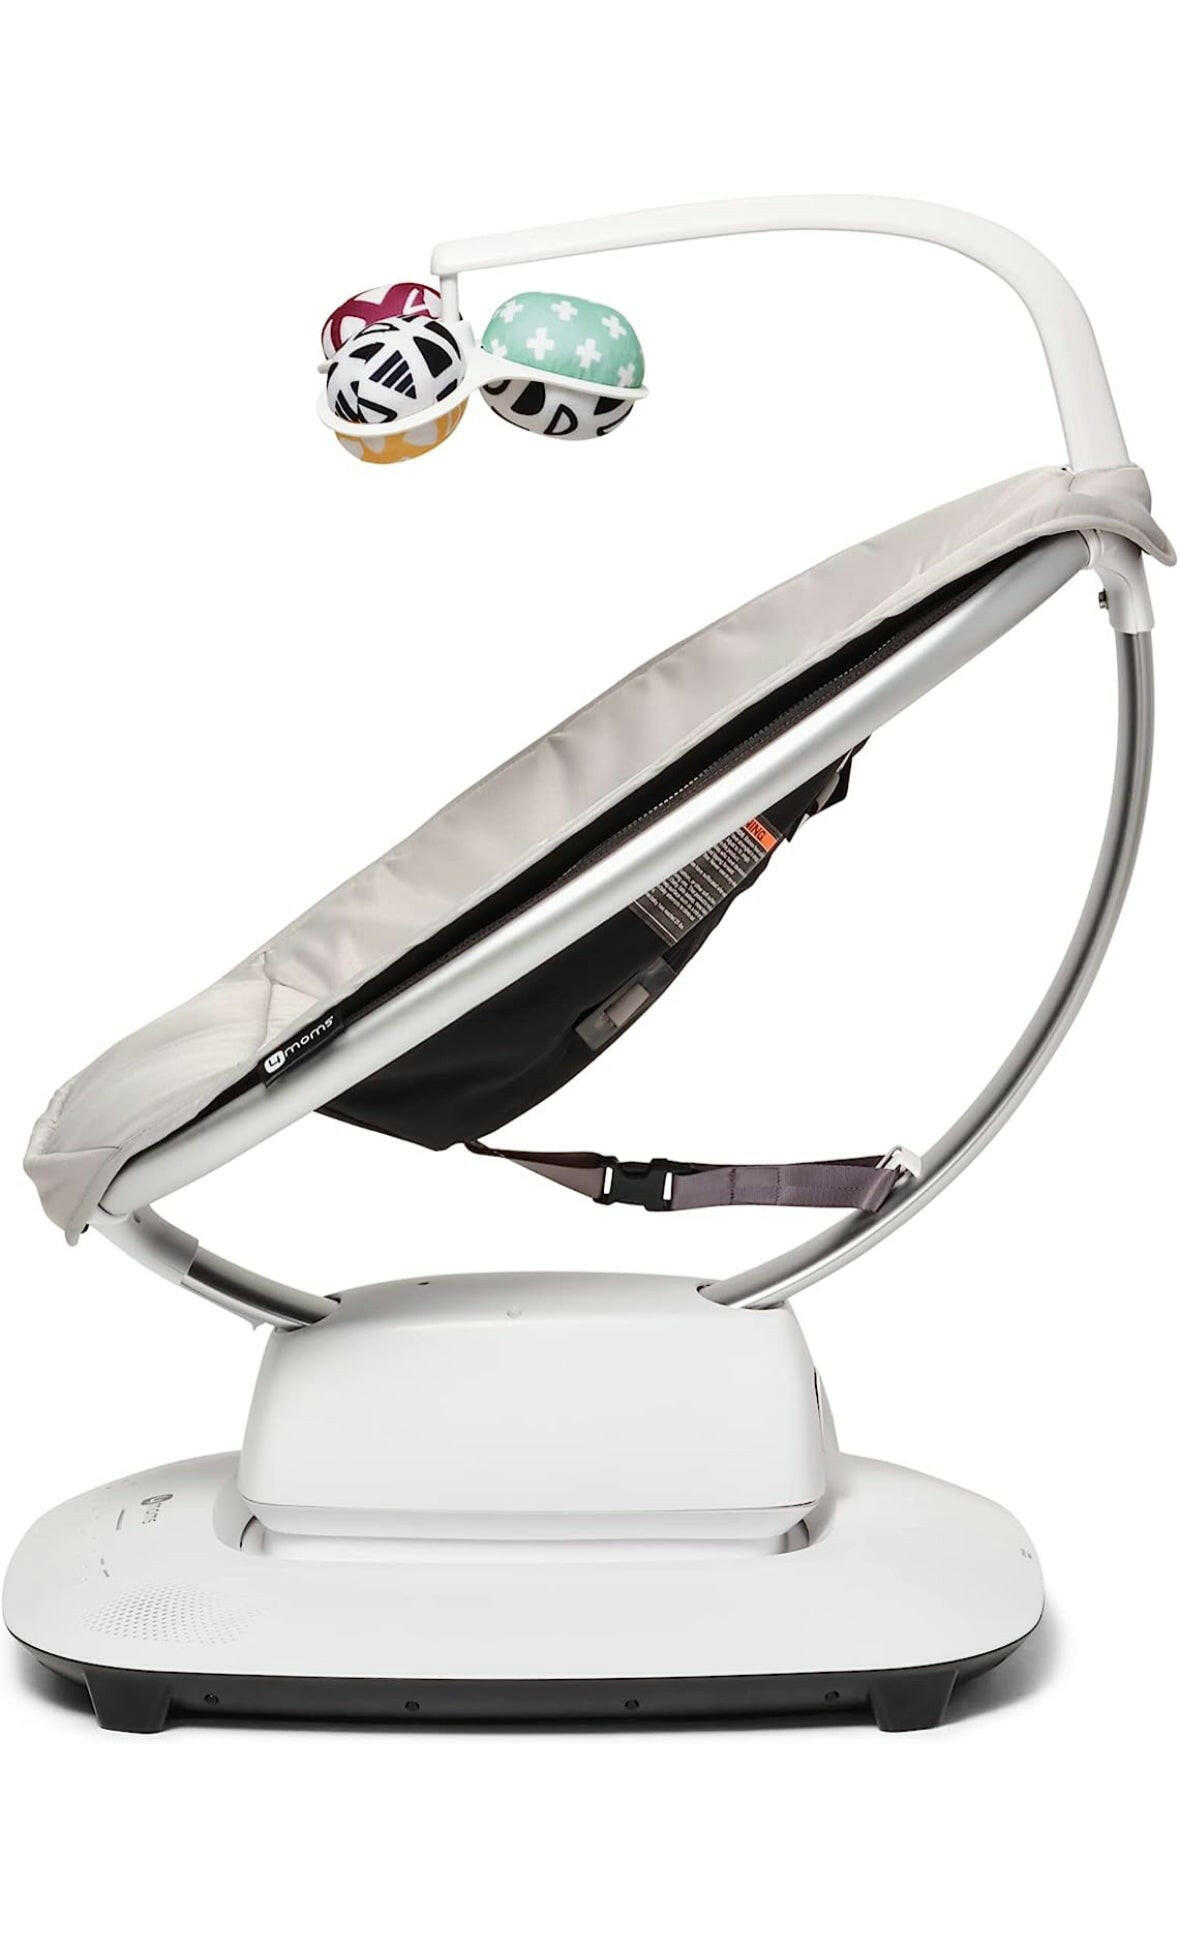 4moms MamaRoo Multi-Motion Baby Swing, Bluetooth Enabled with 5 Unique Motions, Grey.